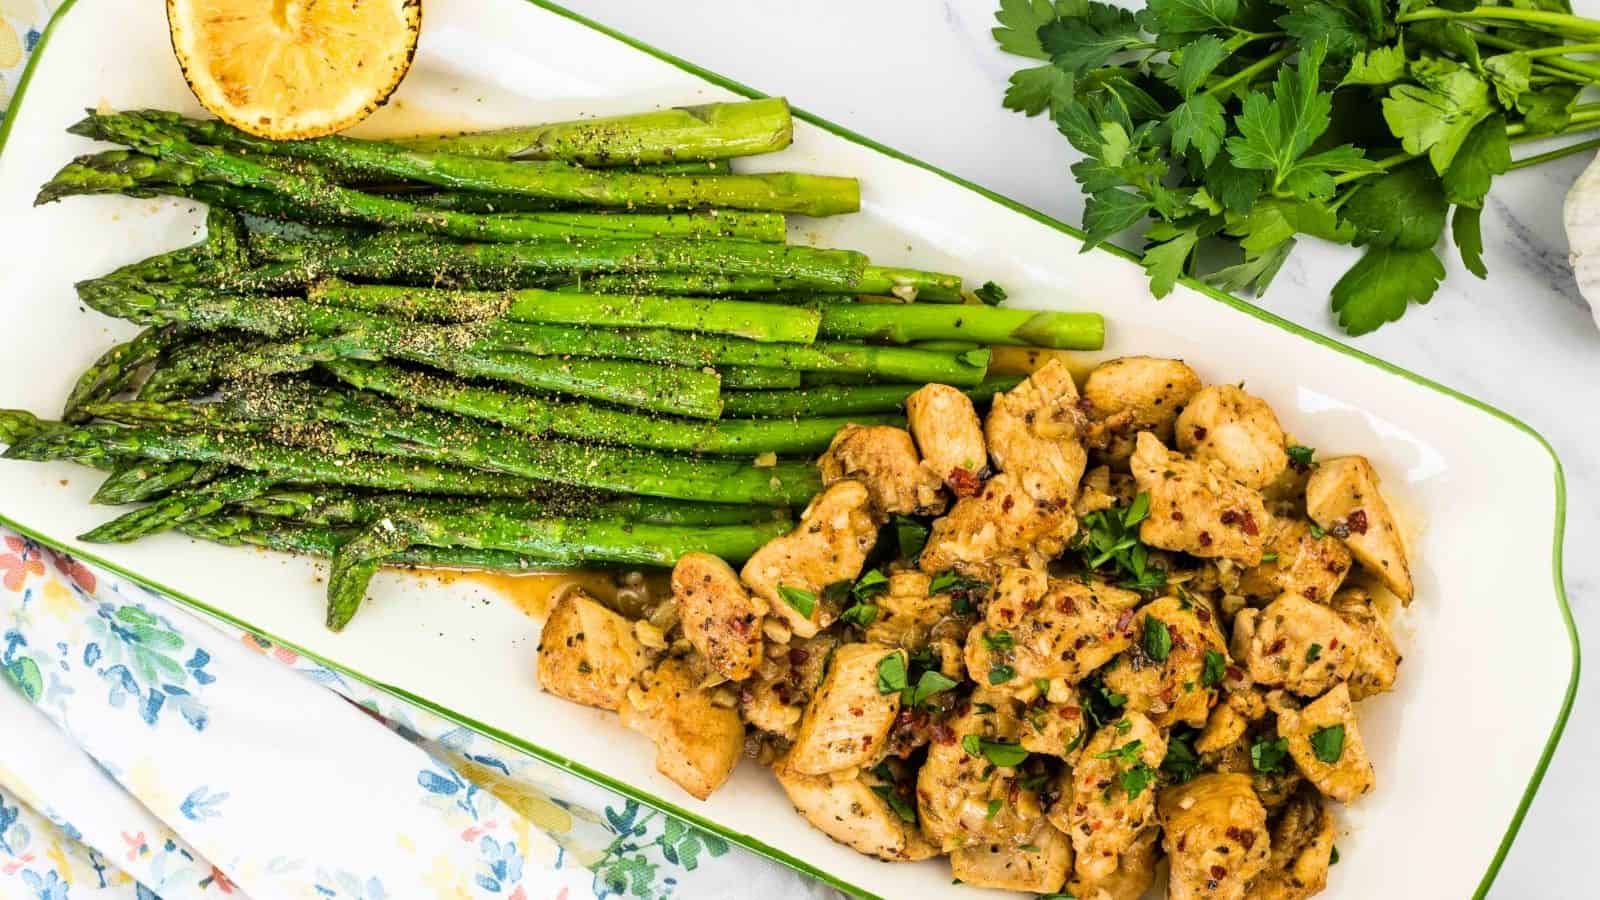 A plate with seasoned asparagus and diced chicken topped with herbs. A halved grilled lemon and fresh parsley are nearby on a white floral tablecloth.